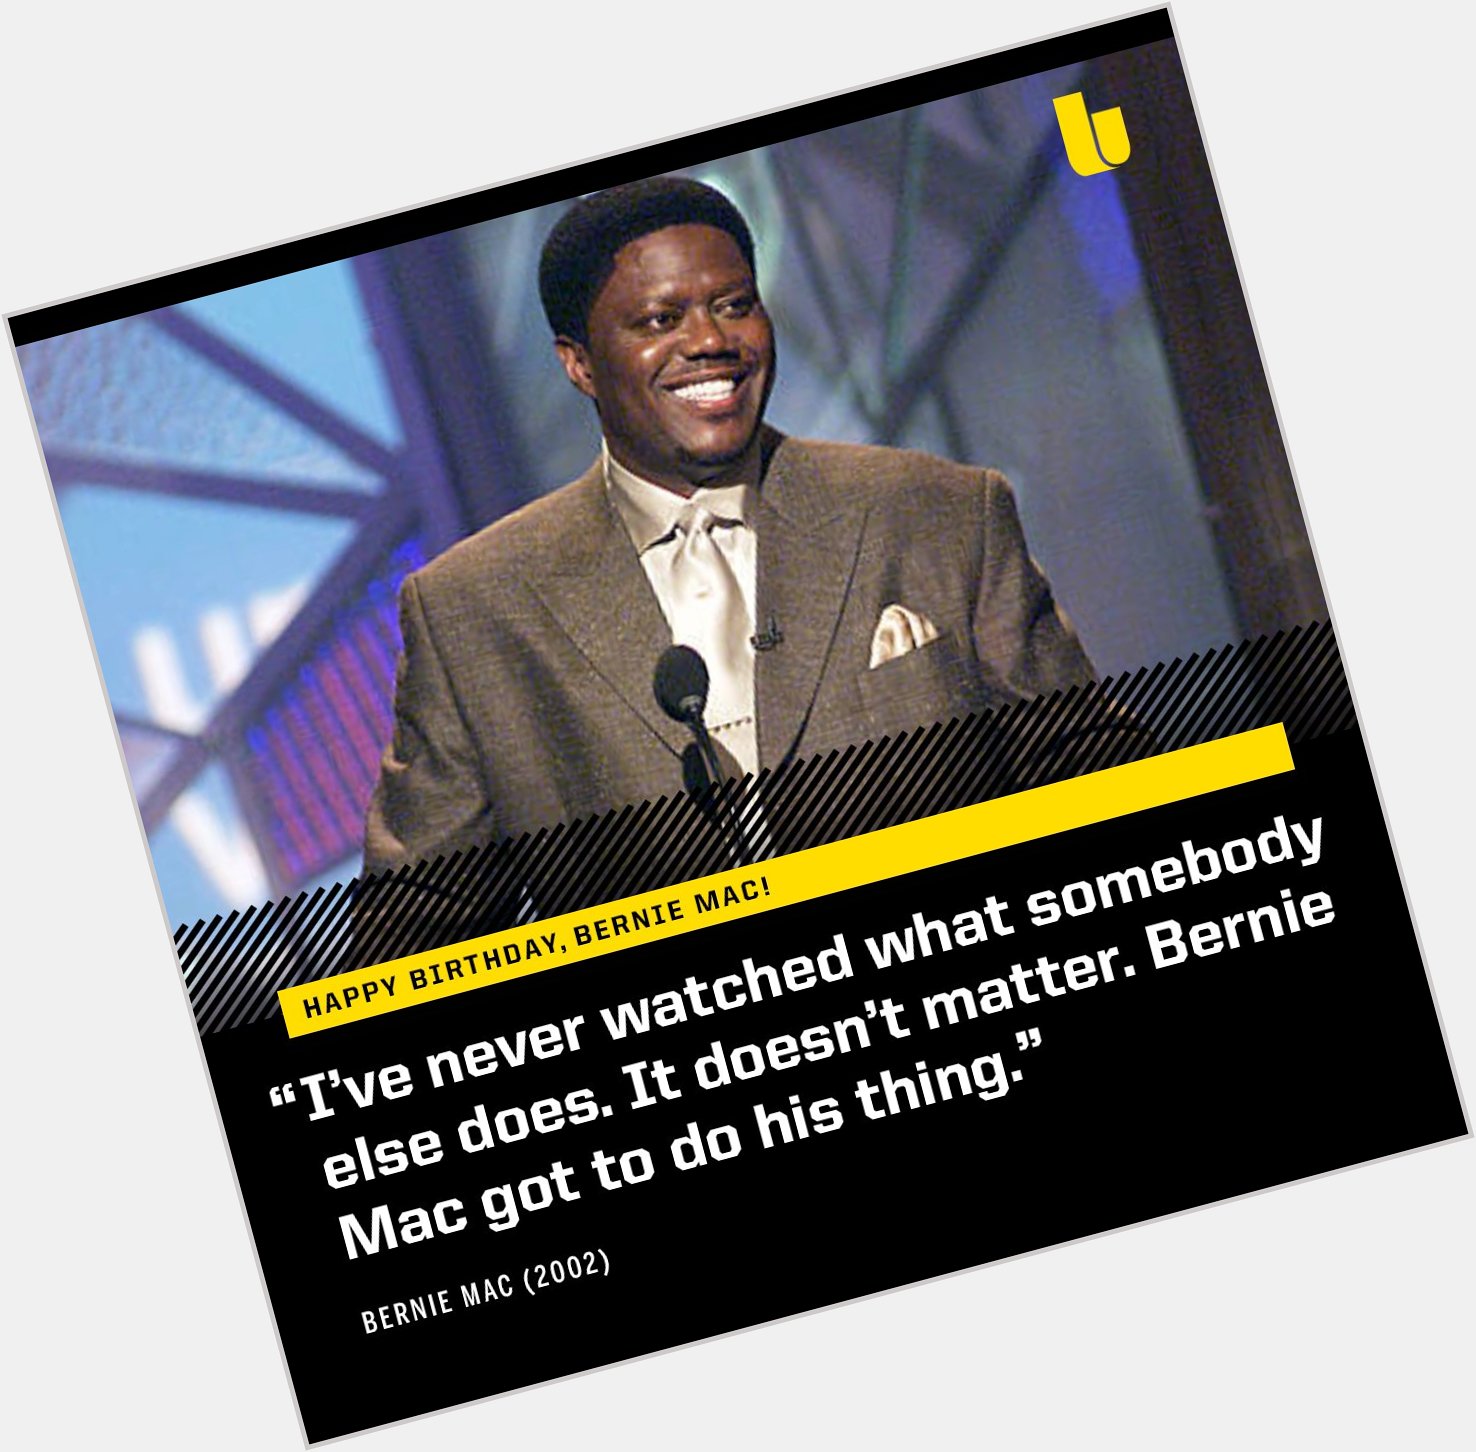 Bernie Mac would have turned 61 today. Happy Birthday to one of the greatest to ever do it. 